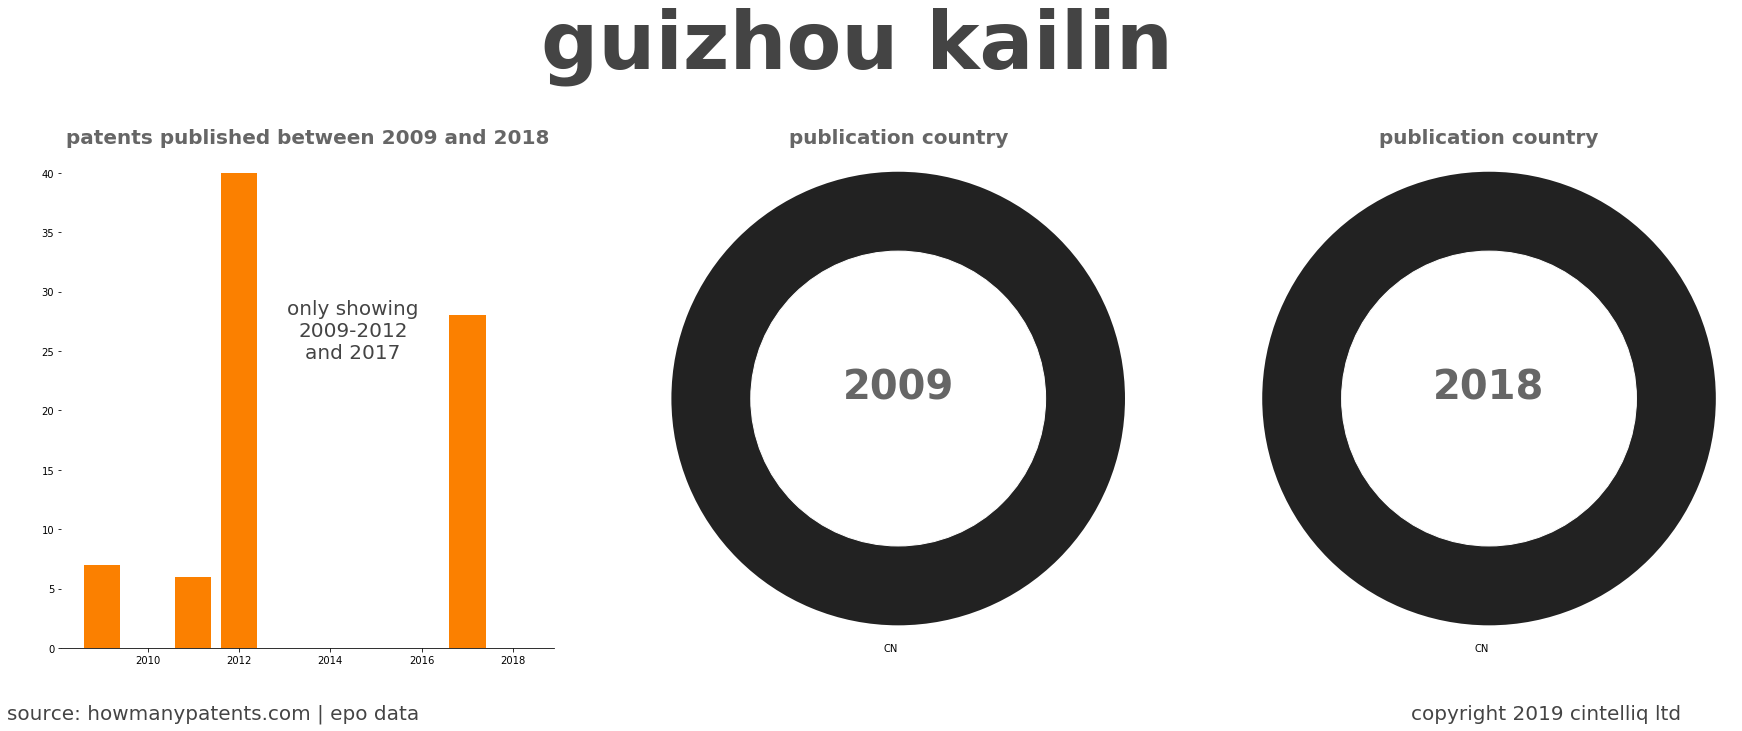 summary of patents for Guizhou Kailin 